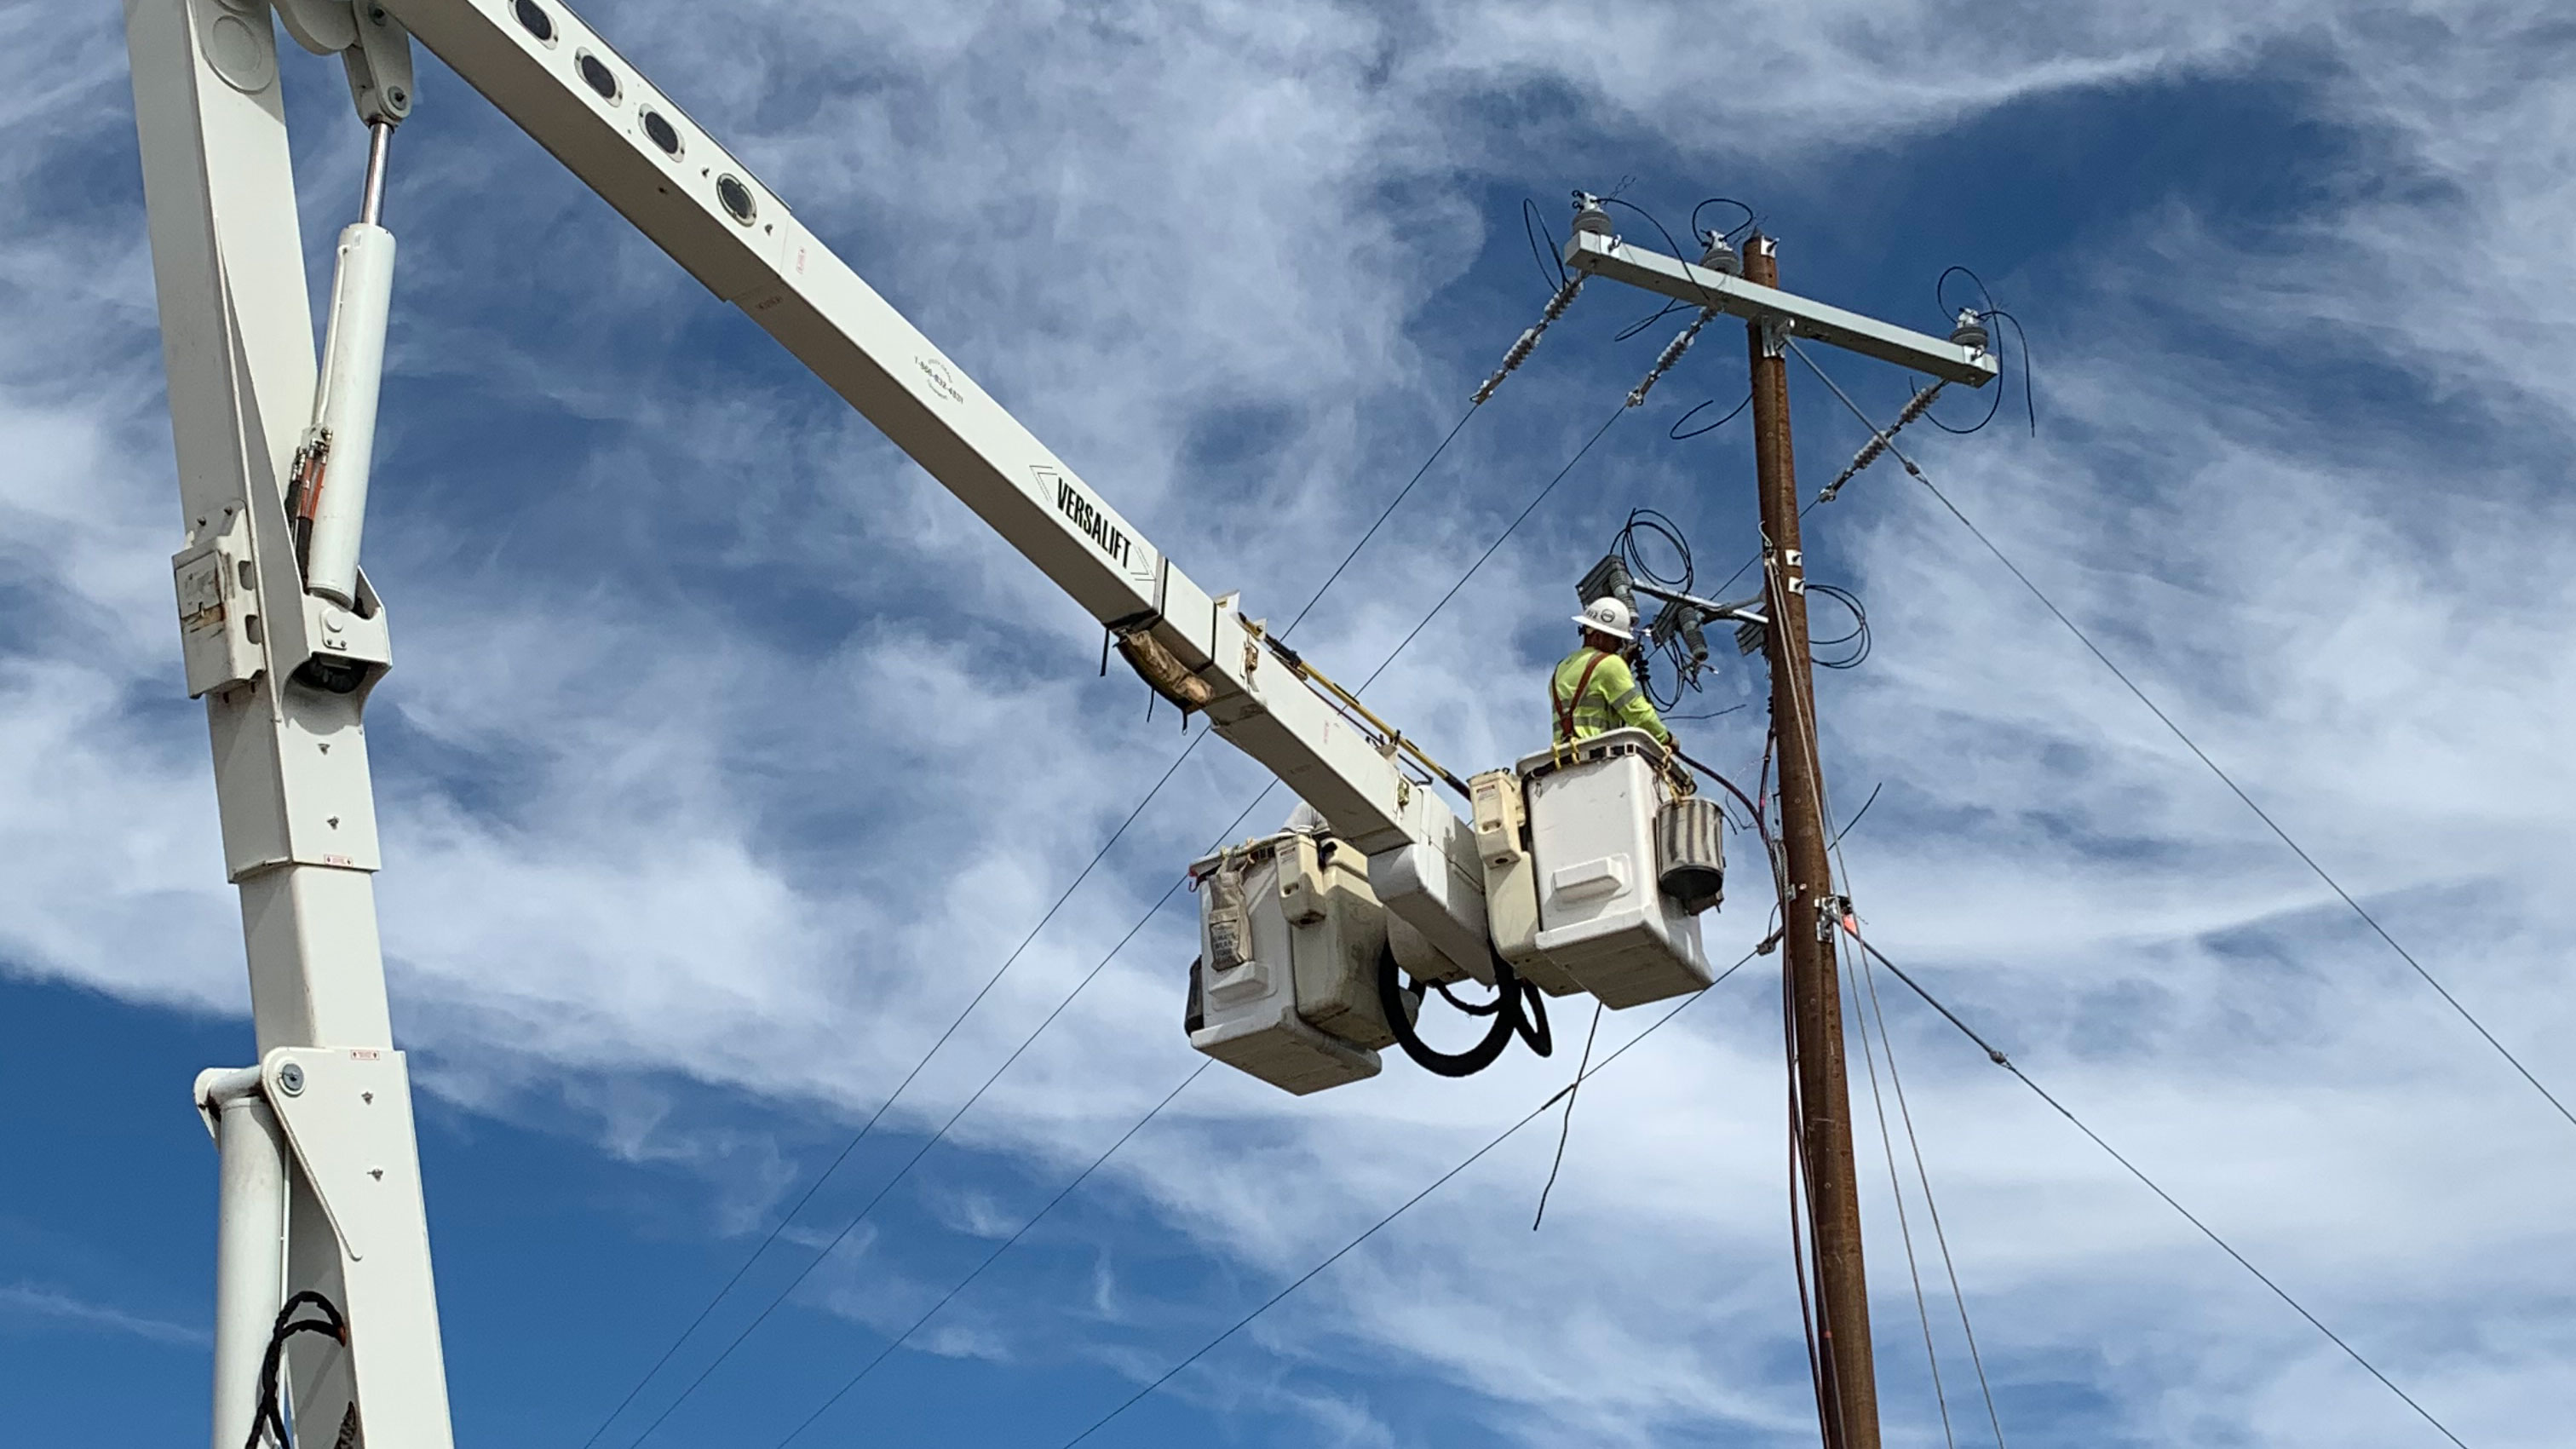 lineman in a bucket working on power lines